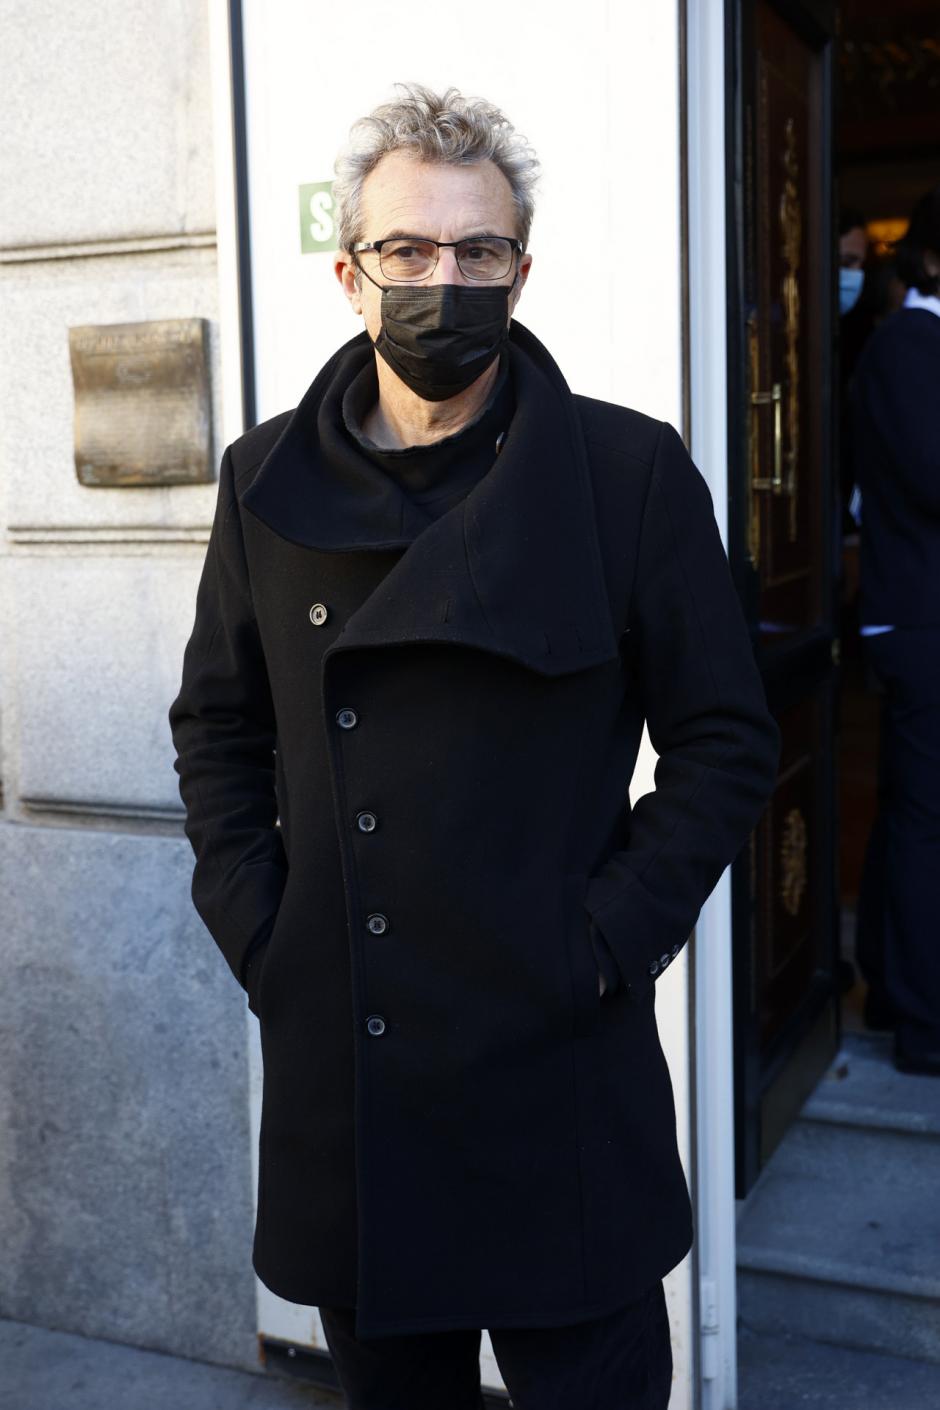 Mariano Barroso at burial of Veronica Forque in Madrid on Wednesday, 15 December 2021.